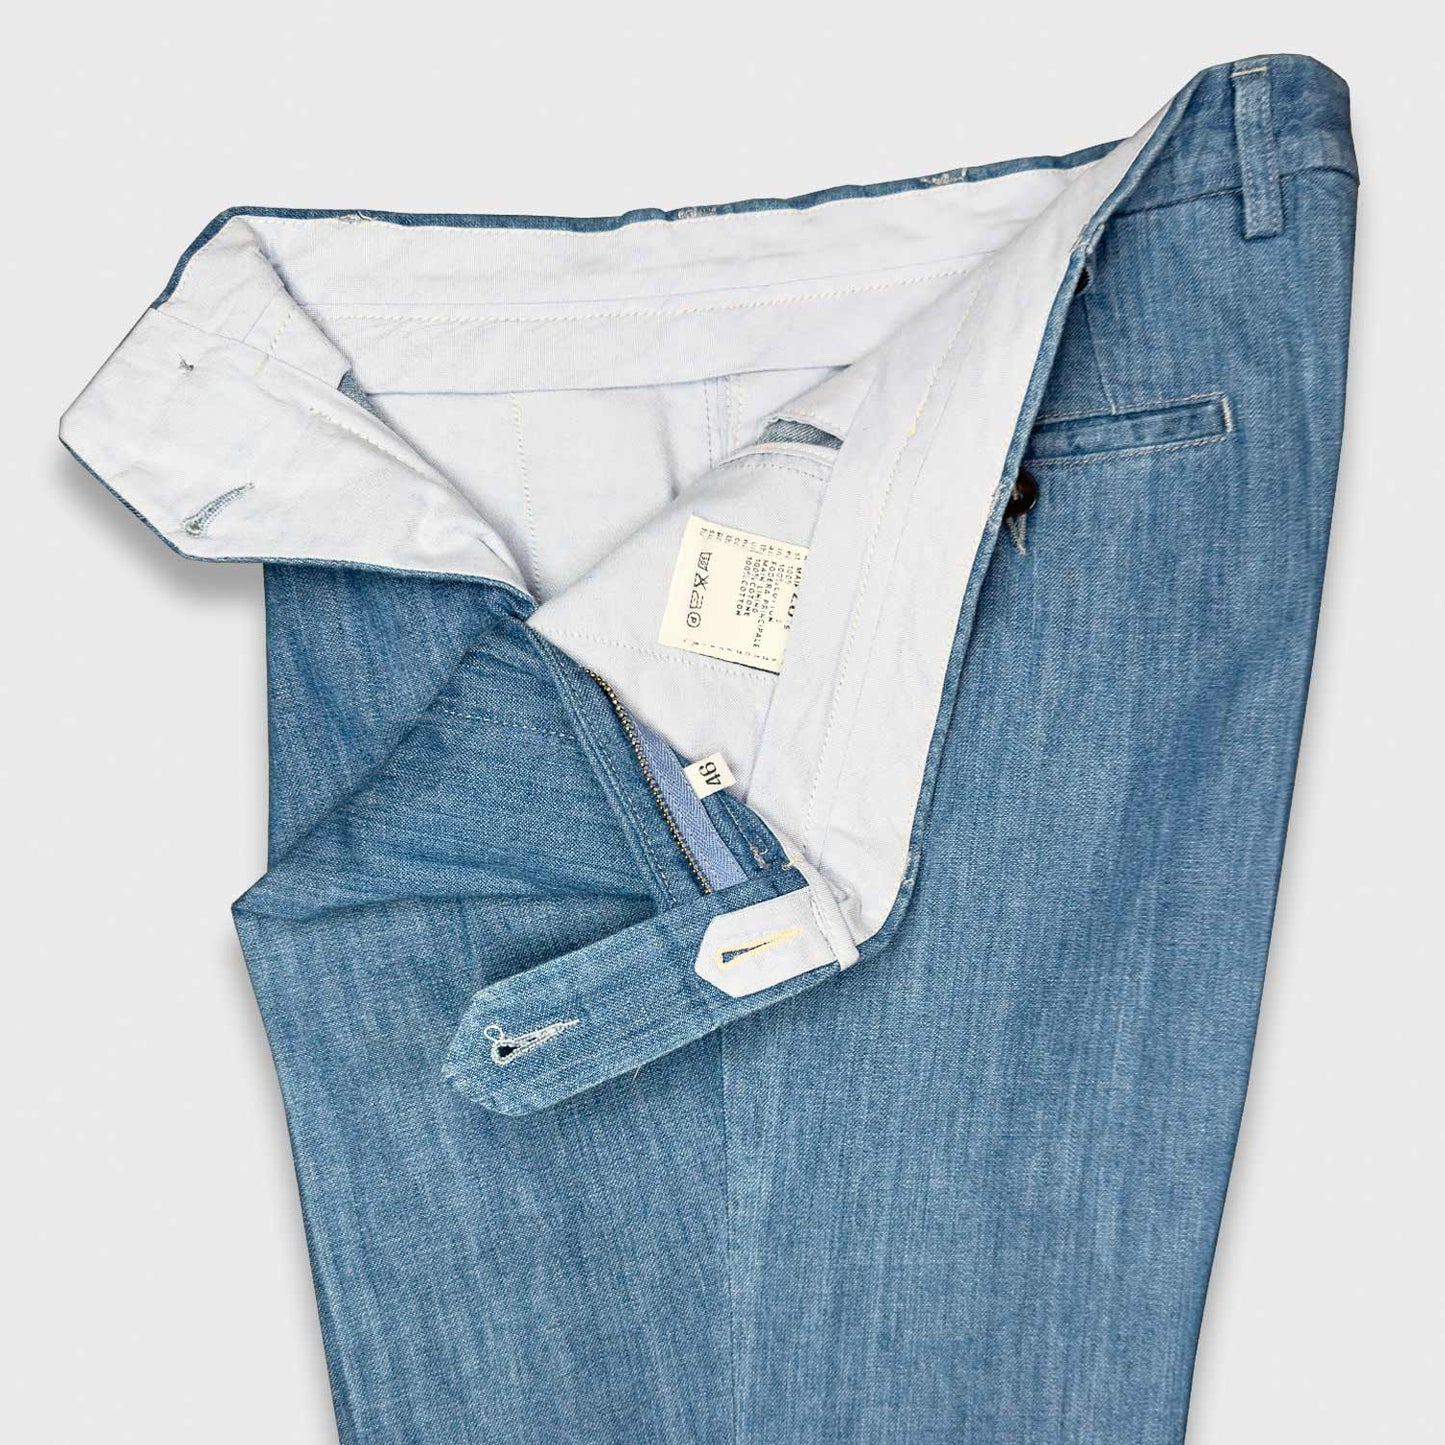 Load image into Gallery viewer, Light Blue Tailored Chambray Jeans Canvas Kurabo. This timeless color light blue chambray jeans canvas fabric, soft and smooth to the touch is perfect for to creating tailored trousers with double pleats and high rise. Rotasport by Rota pantaloni, handmade in Italy with a soft and refined Japanese Kurabo denim fabric.
